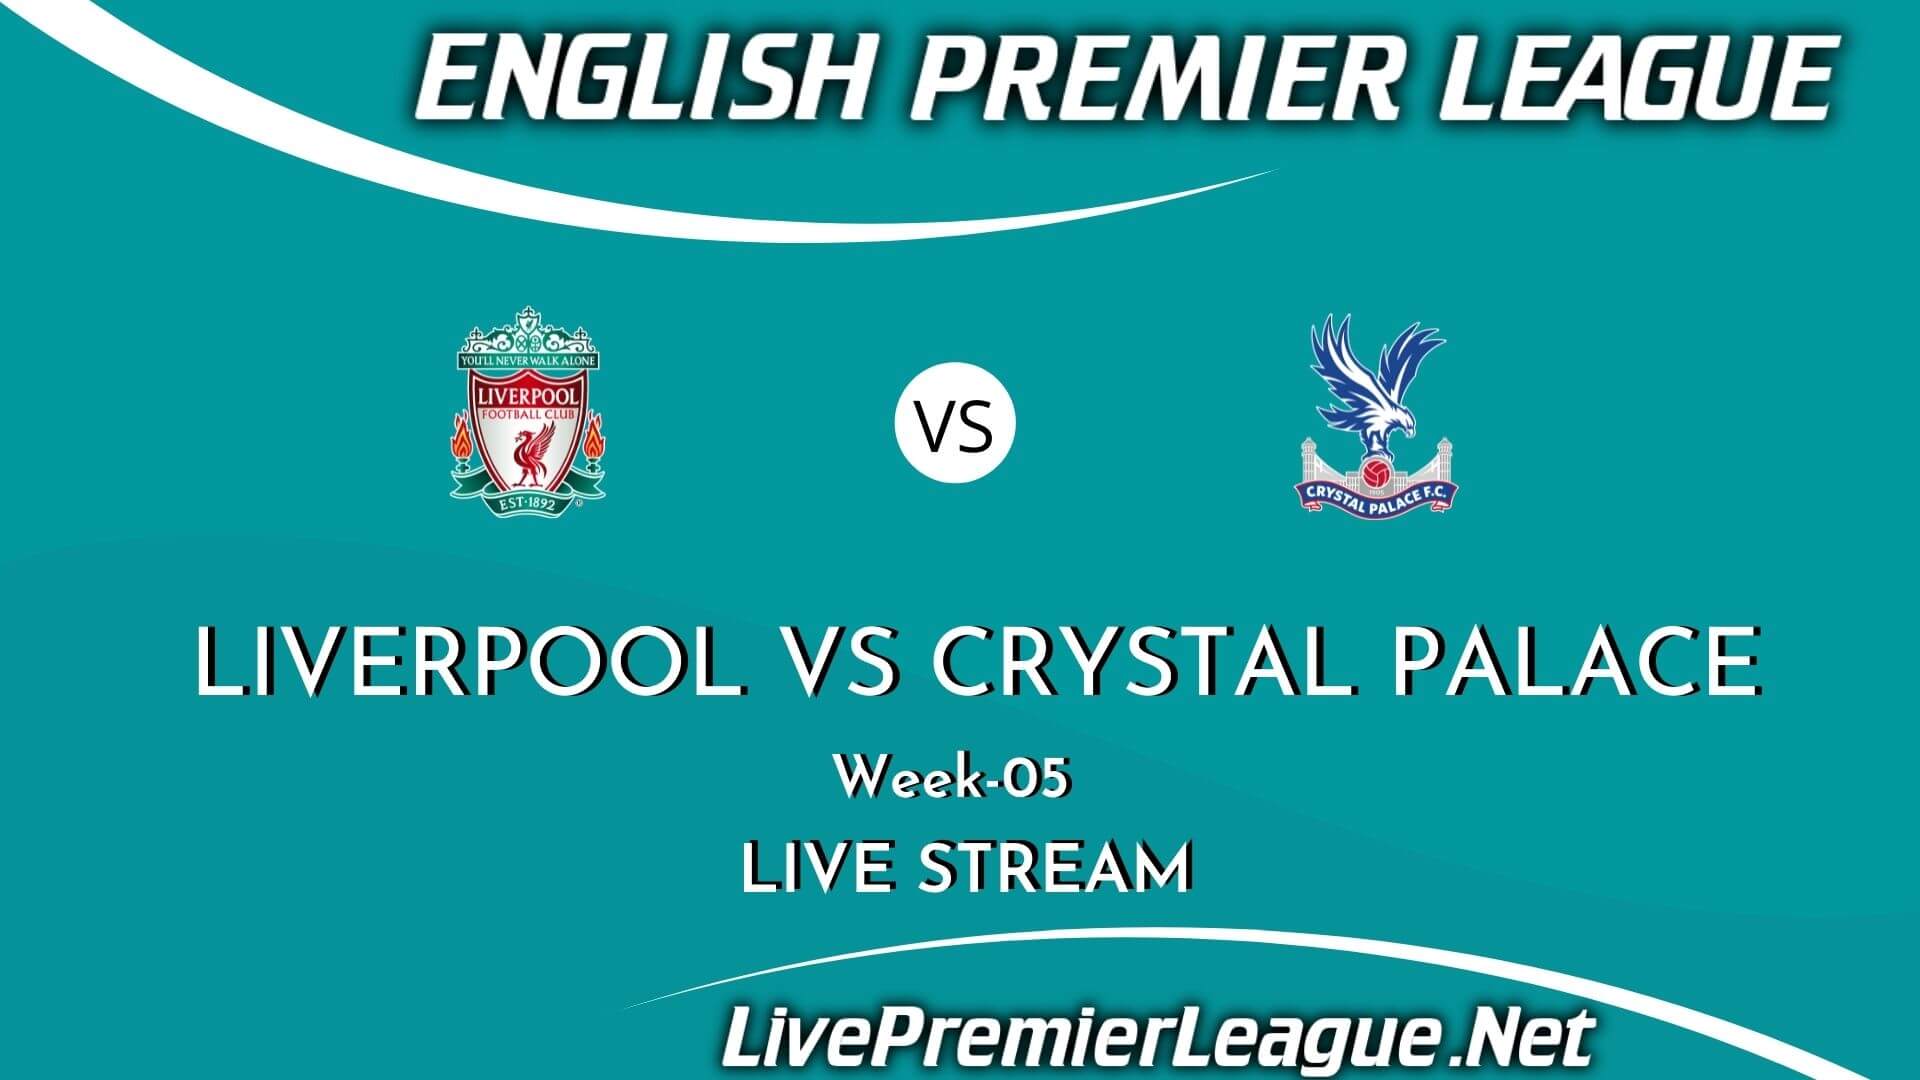 Liverpool Vs Crystal Palace Live Stream 2021 | EPL Week 5